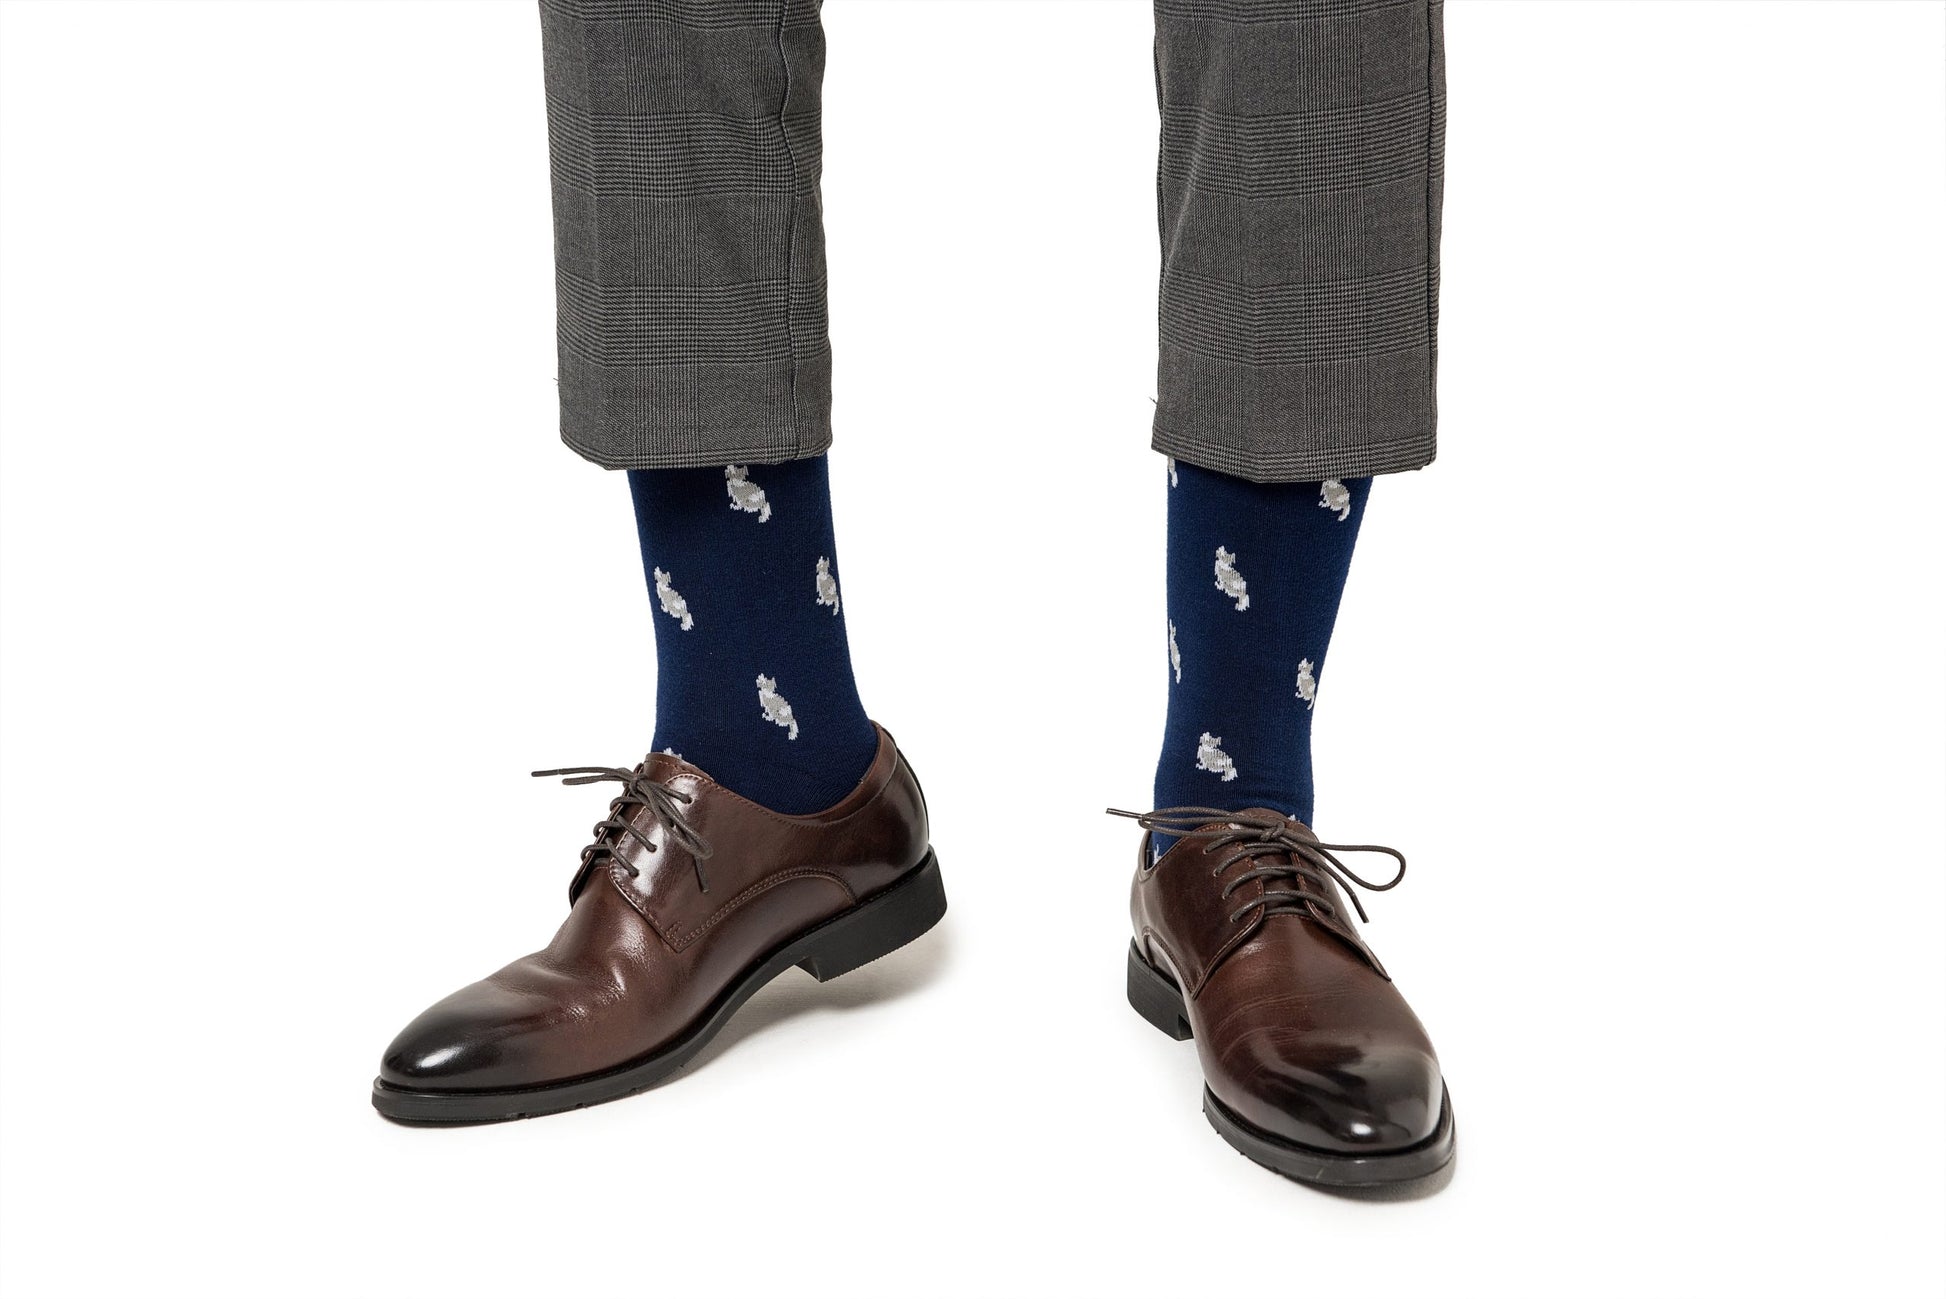 A pair of legs wearing brown shoes and Cat Socks.